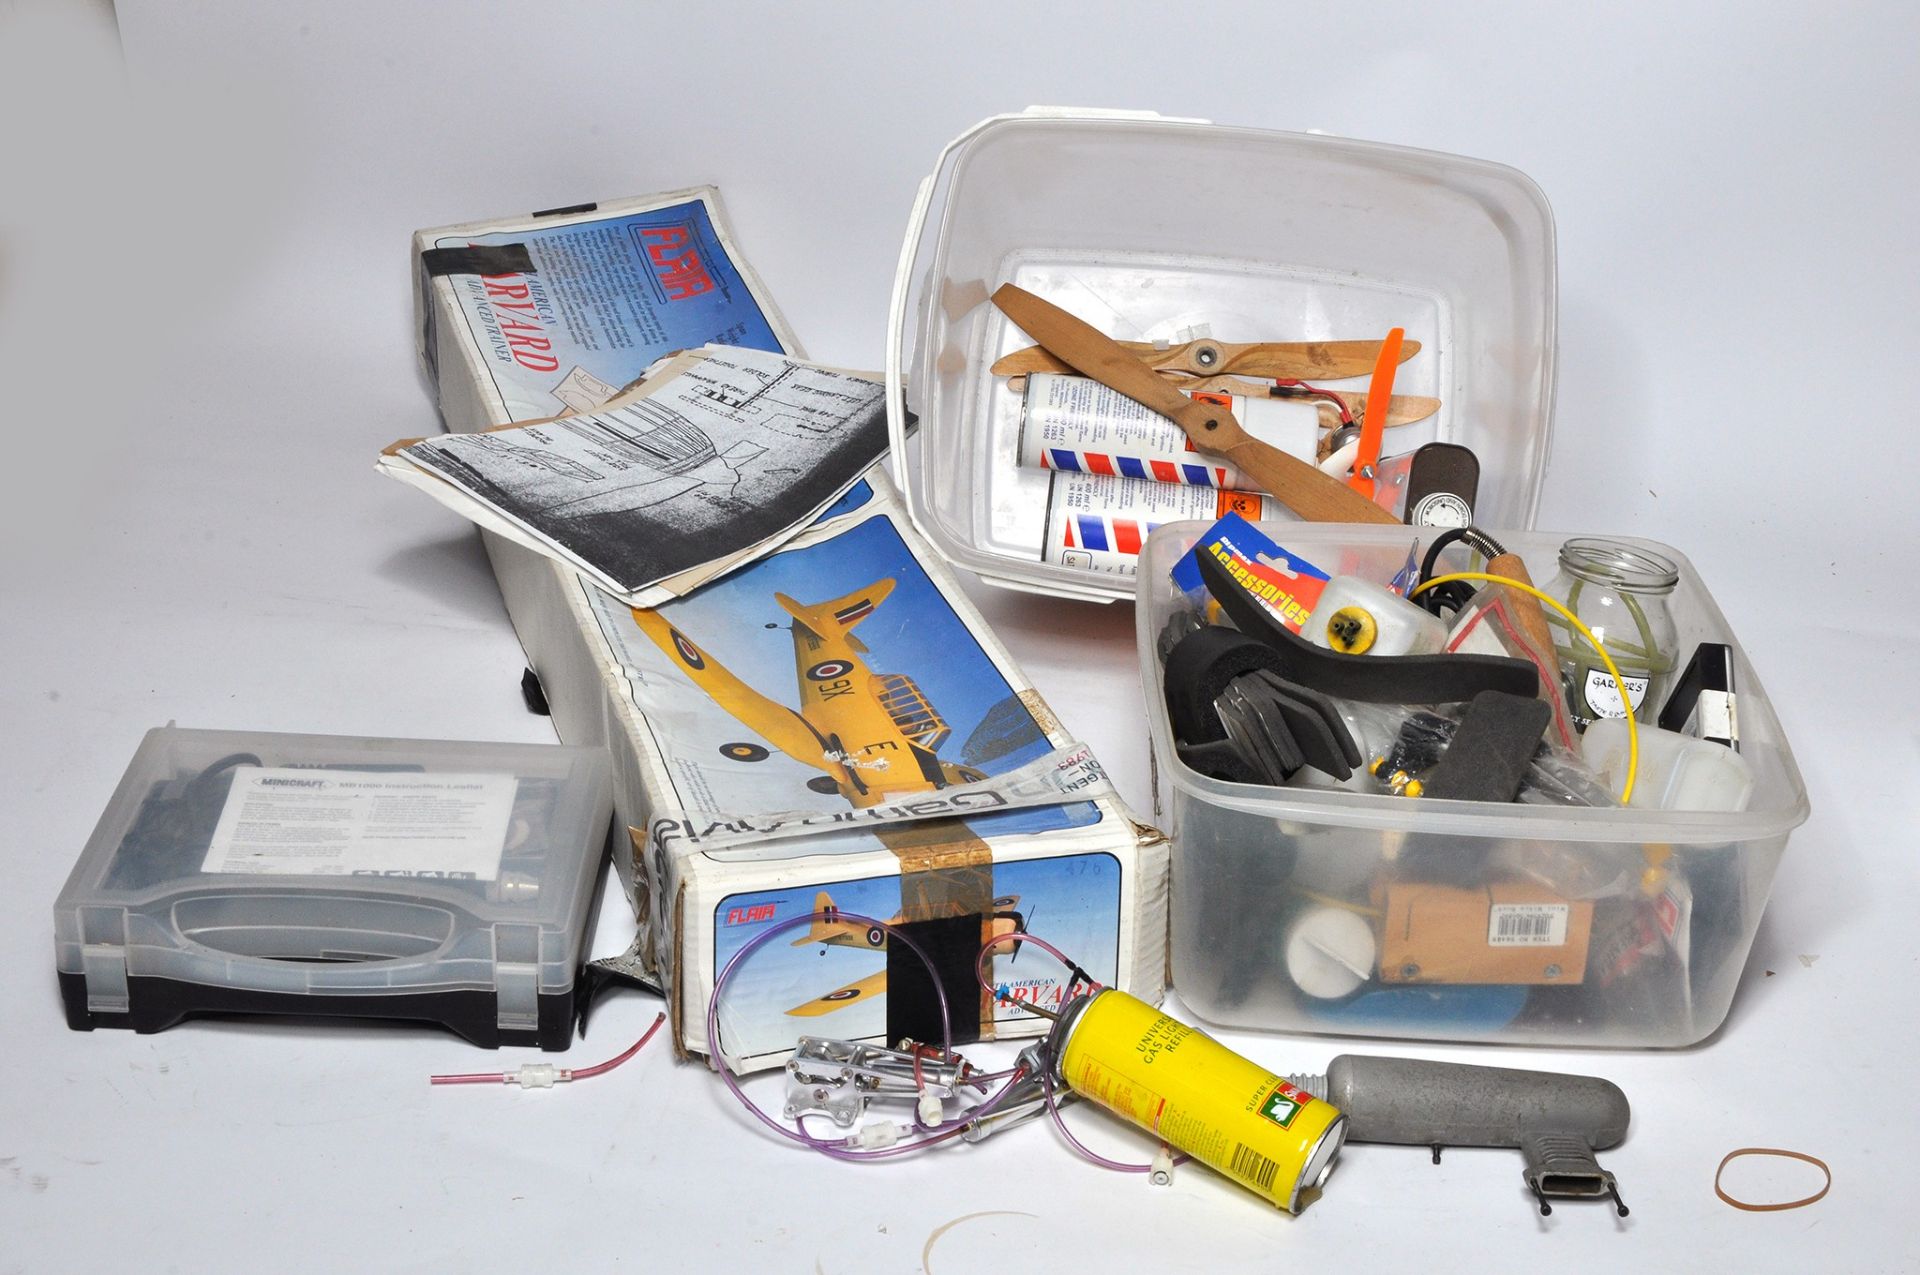 An assortment of aircraft modelling accessories, tools and spares including kit for spares